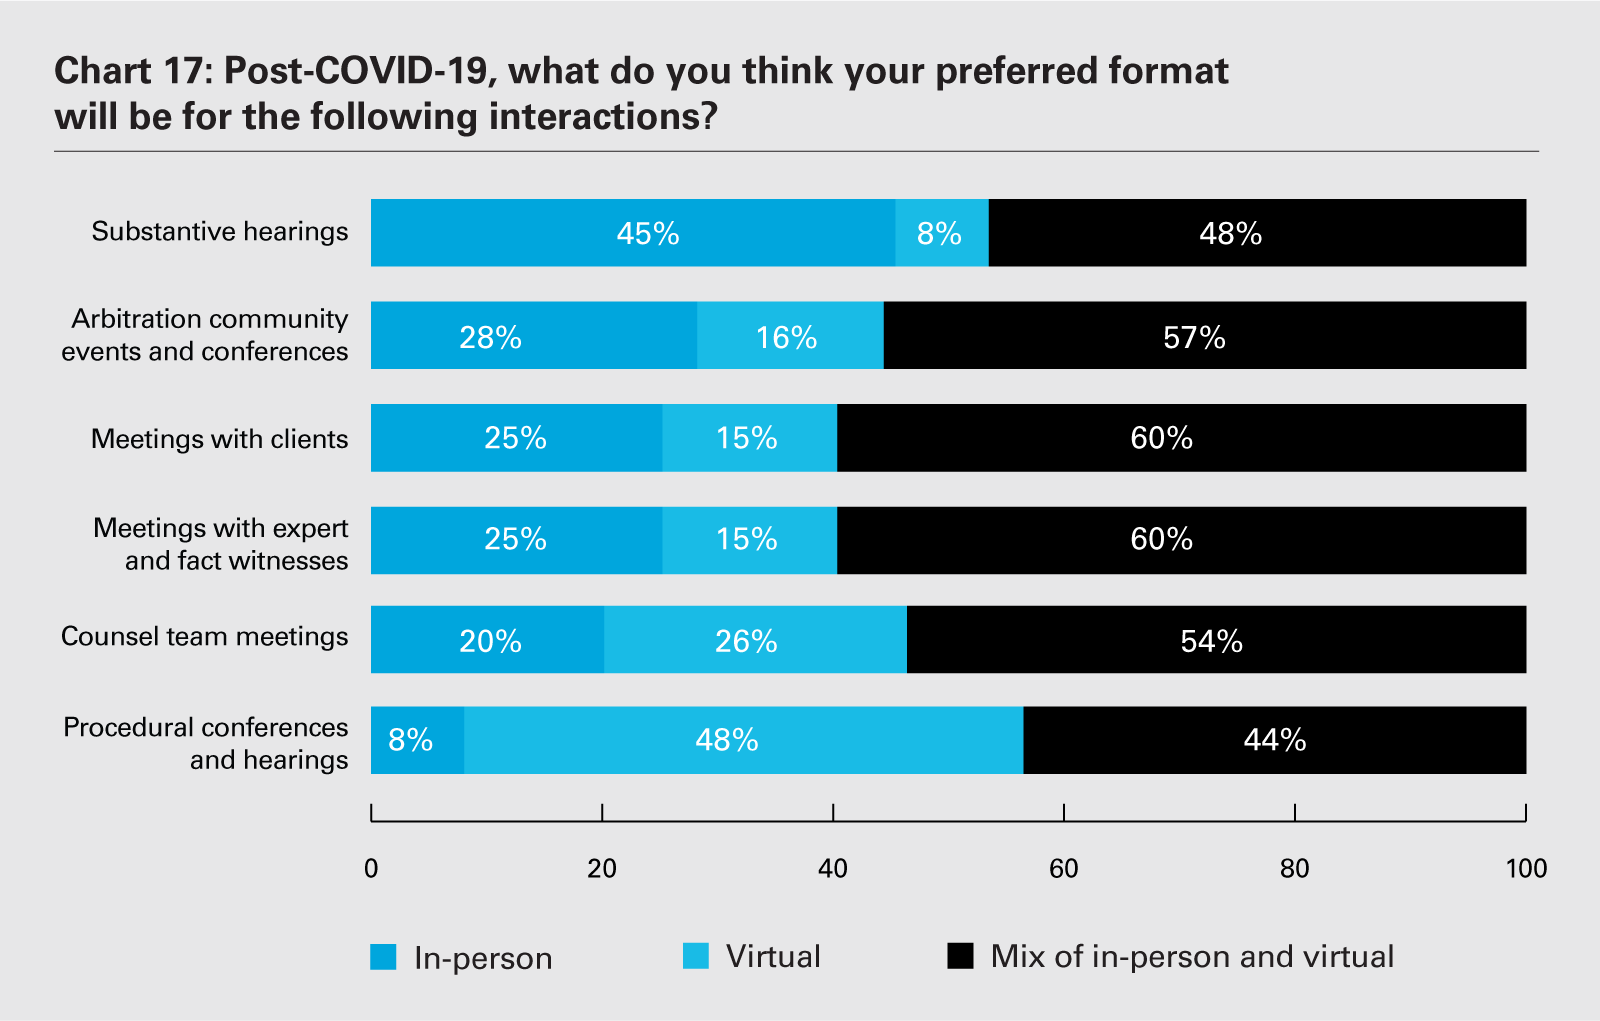 Chart 17: Post-COVID-19, what do you think your preferred format will be for the following interactions?